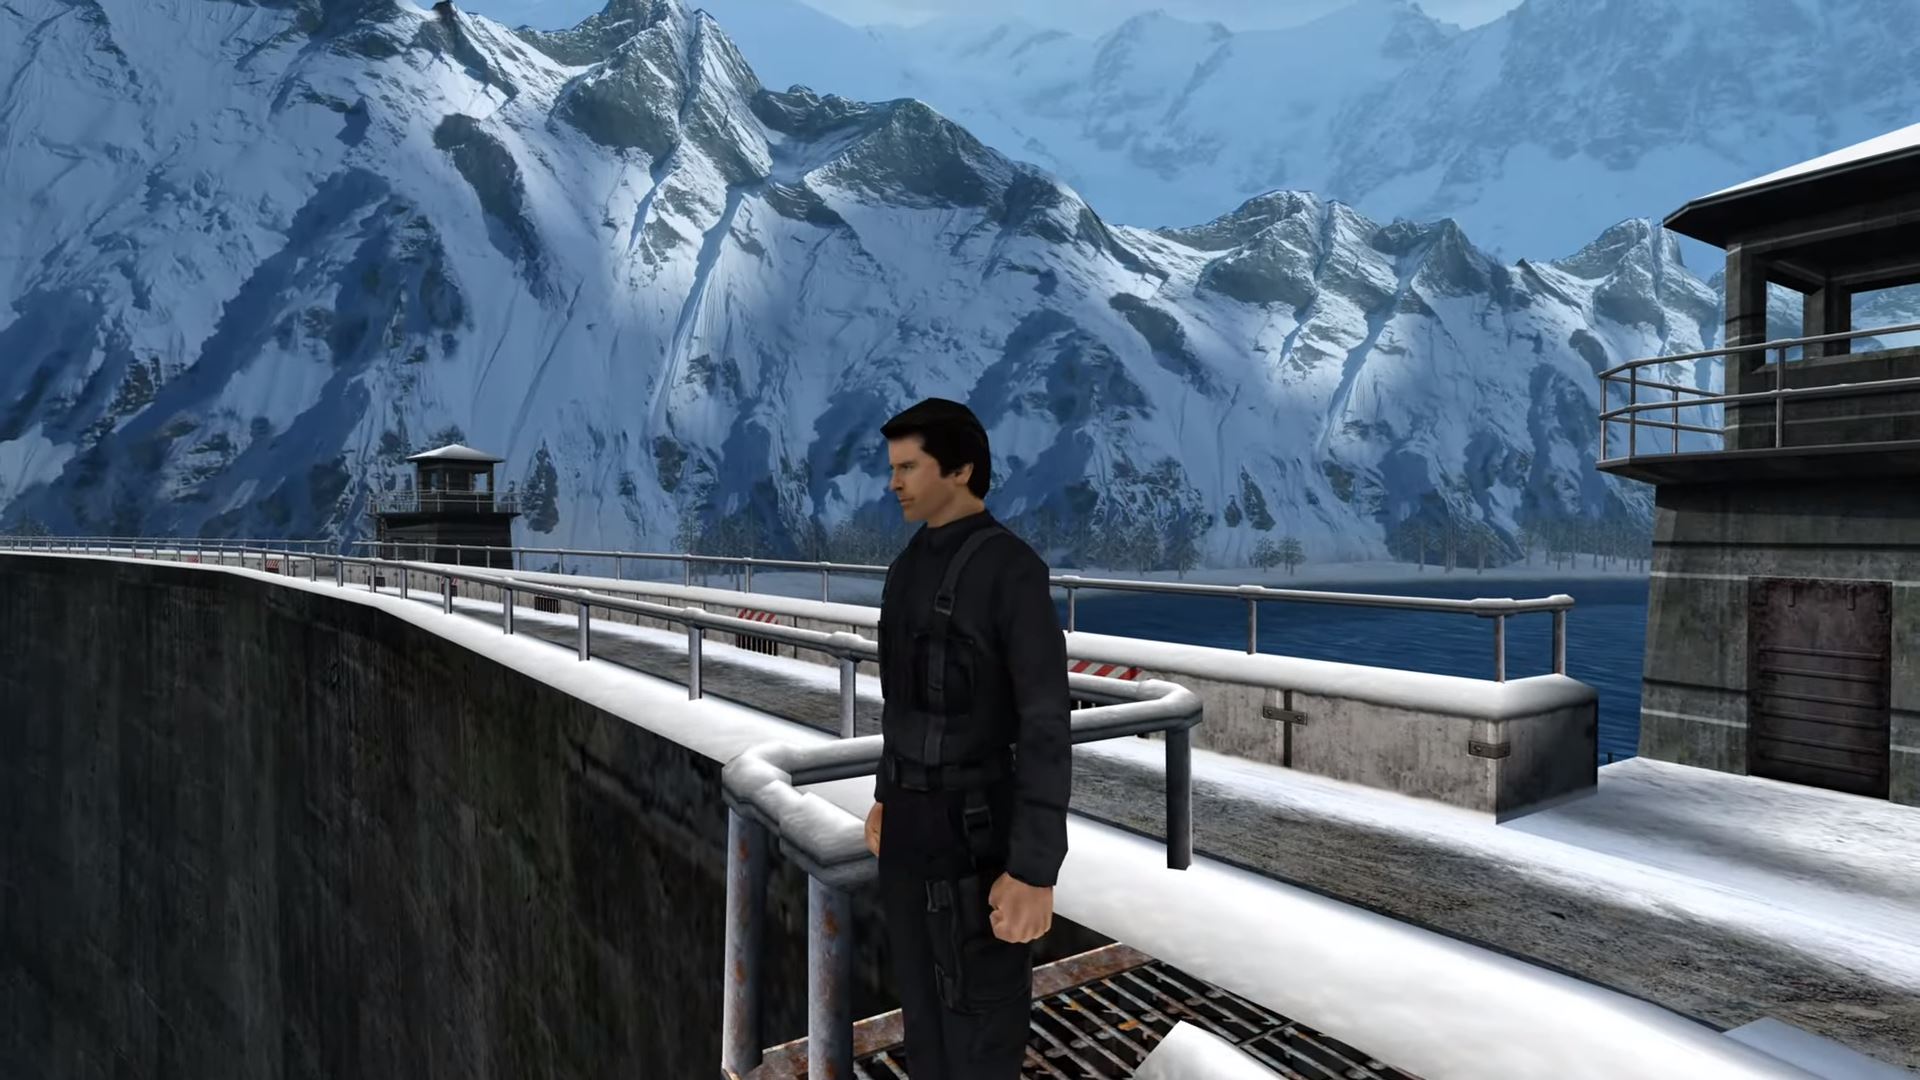 How to Play the Unreleased GoldenEye 007 Remake Online